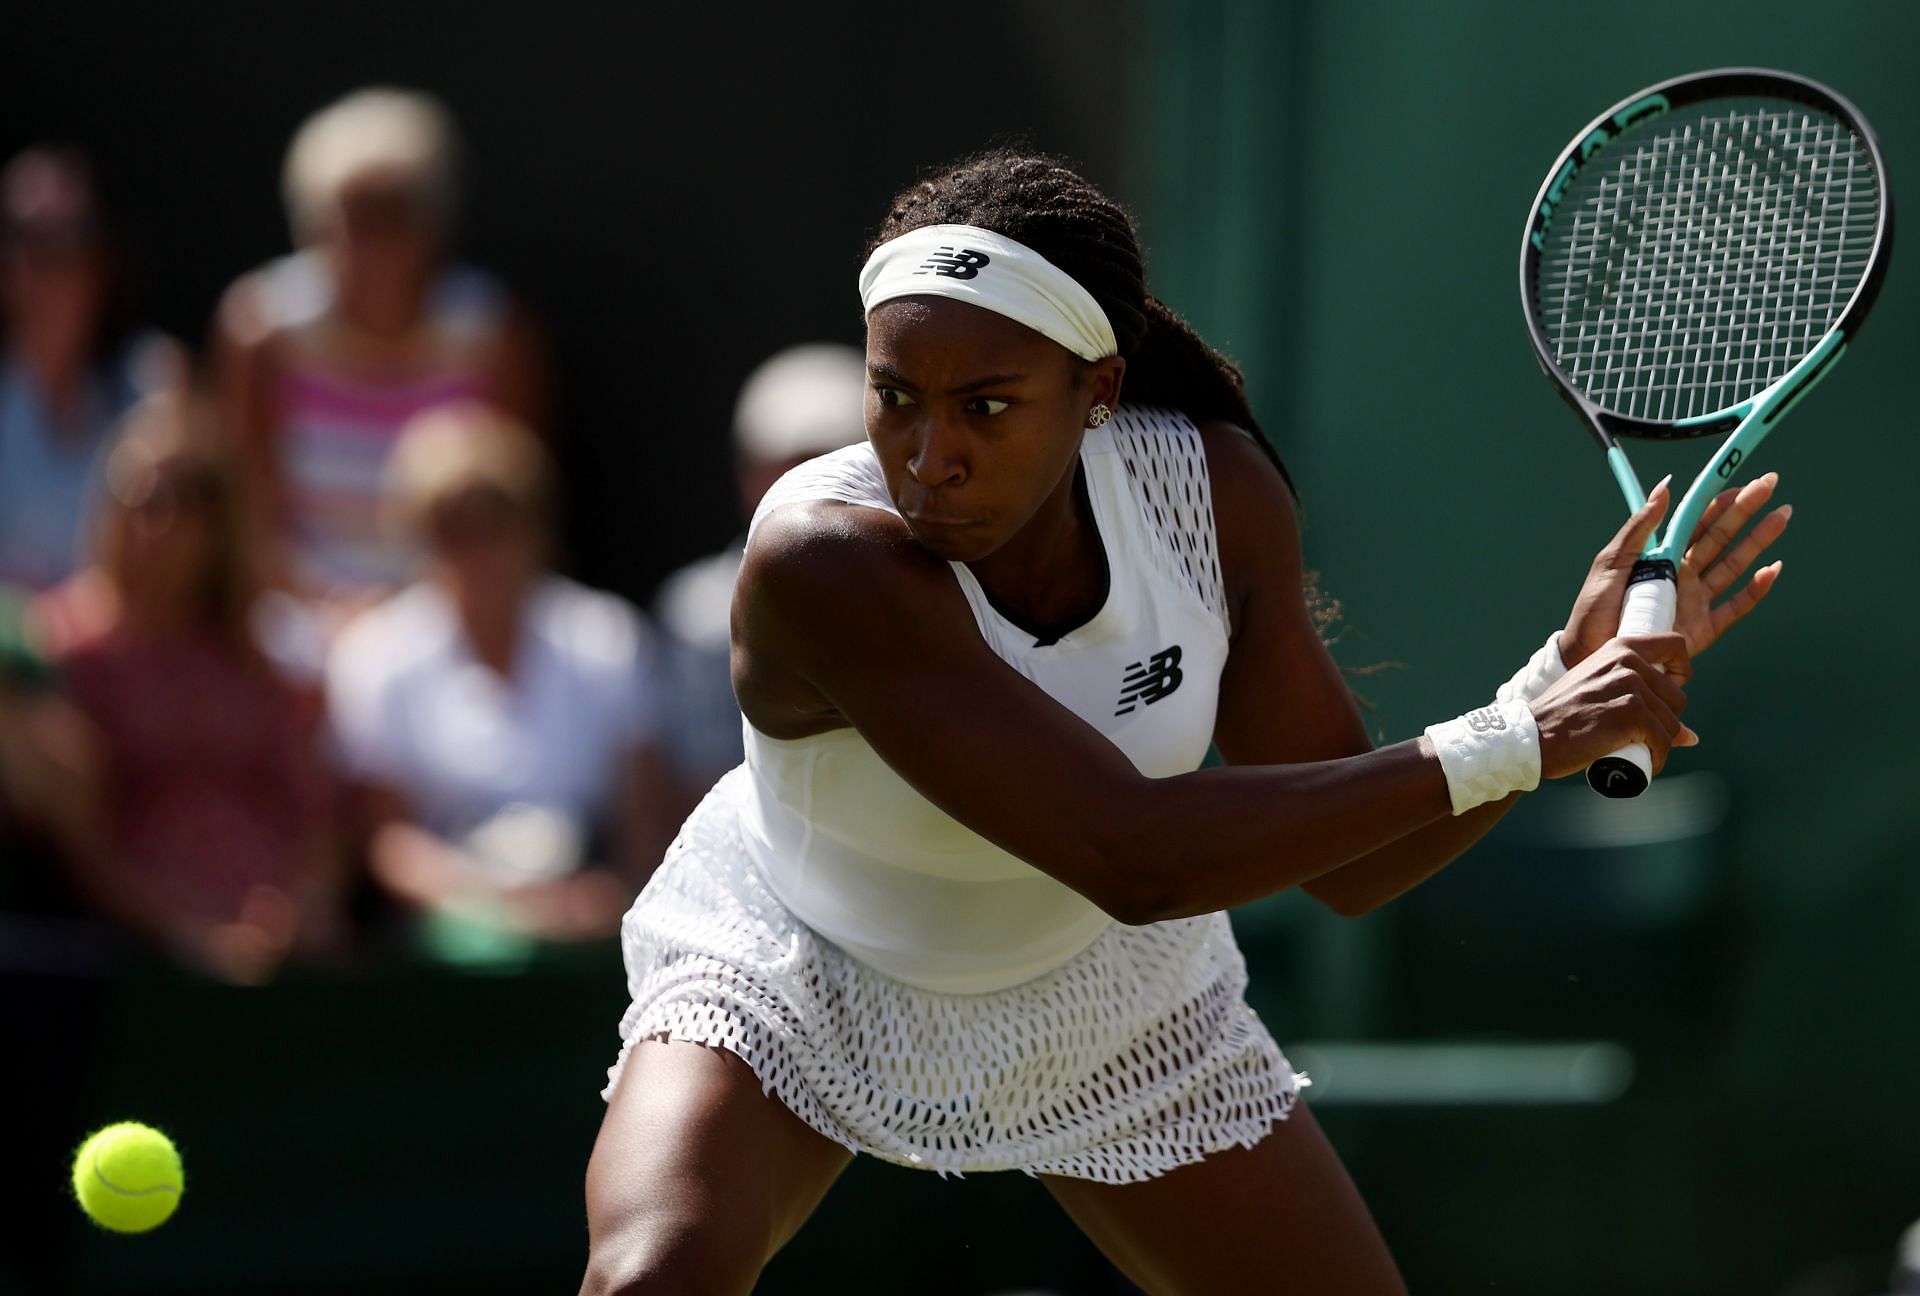 Coco Gauff in action at the 2022 Wimbledon Championships